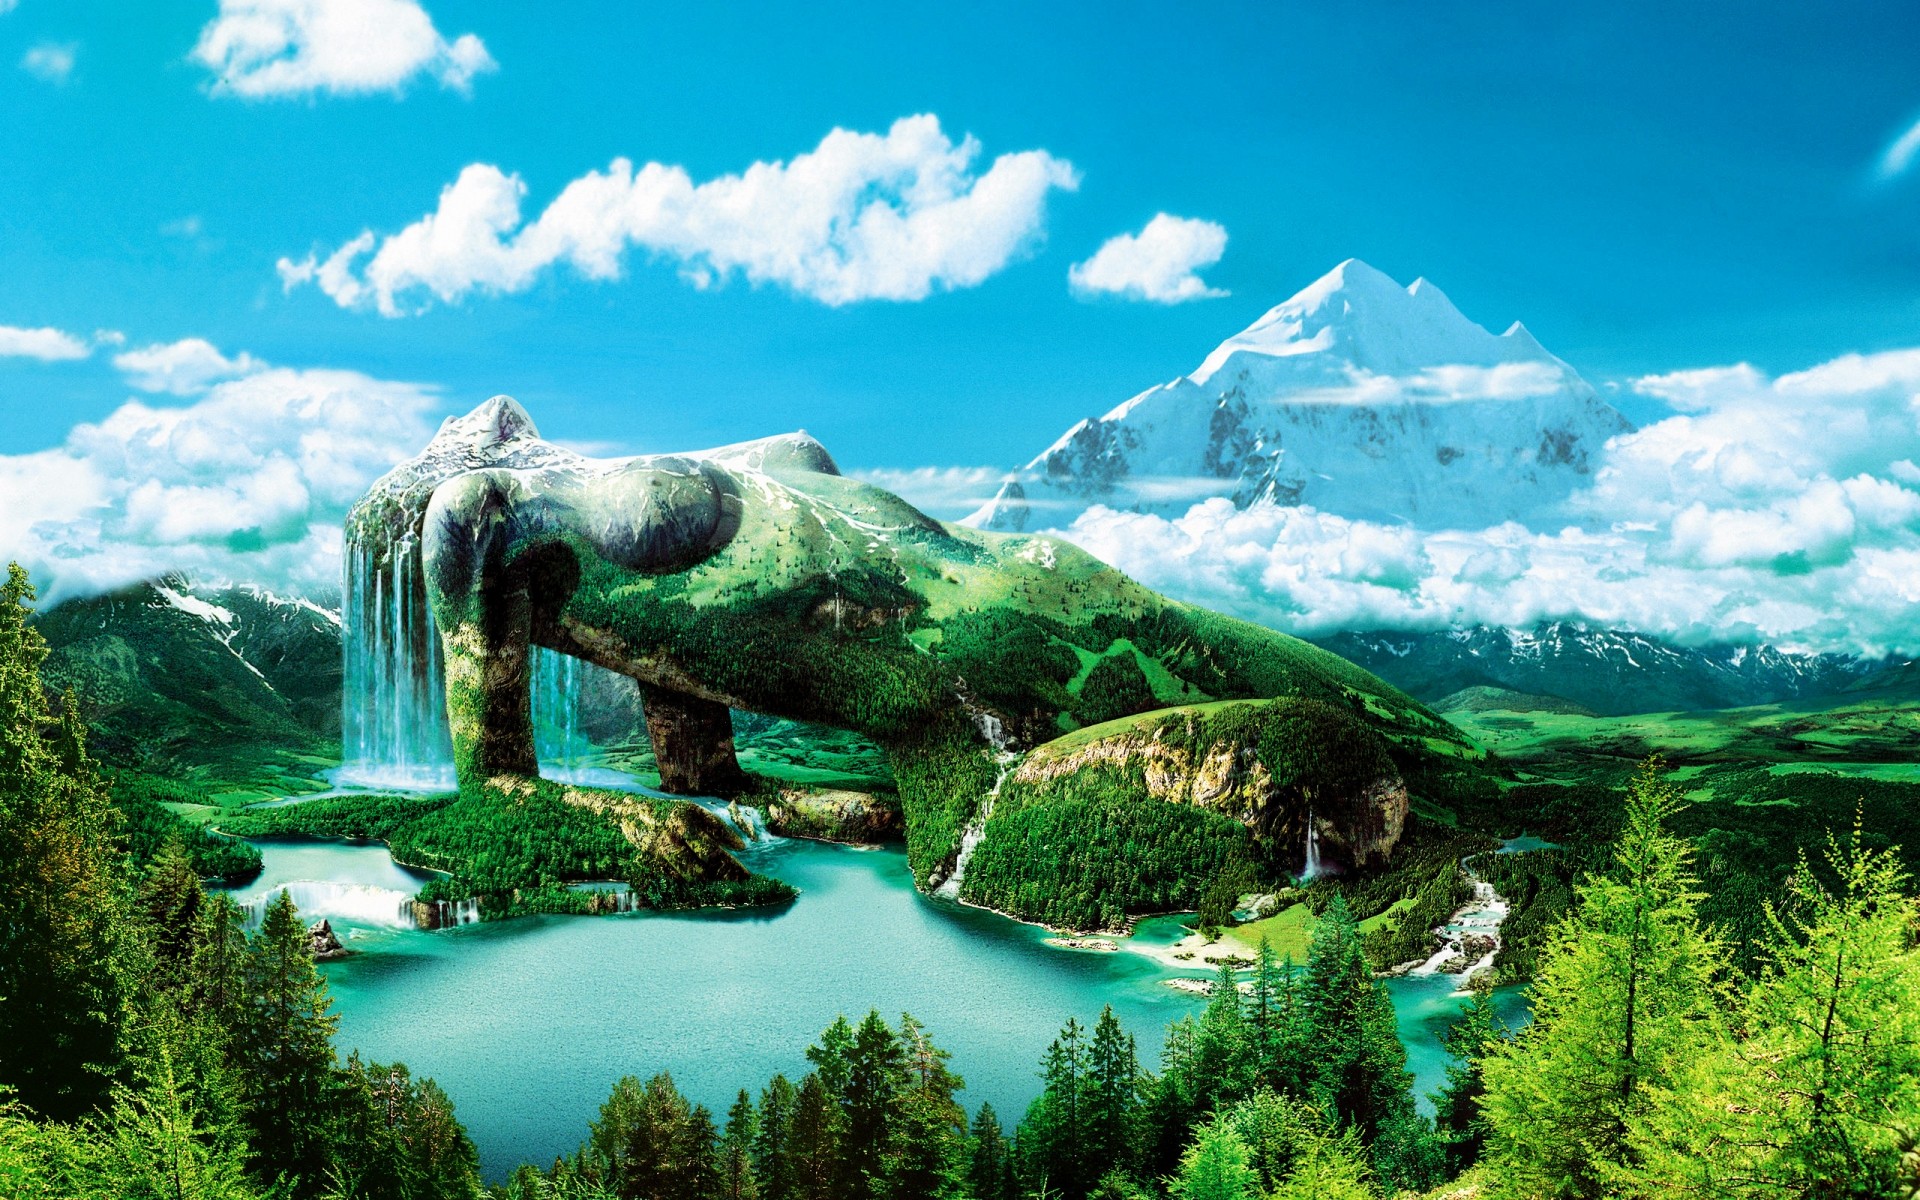 fantasy water travel nature outdoors landscape sky mountain lake summer scenic green trees mountains girl